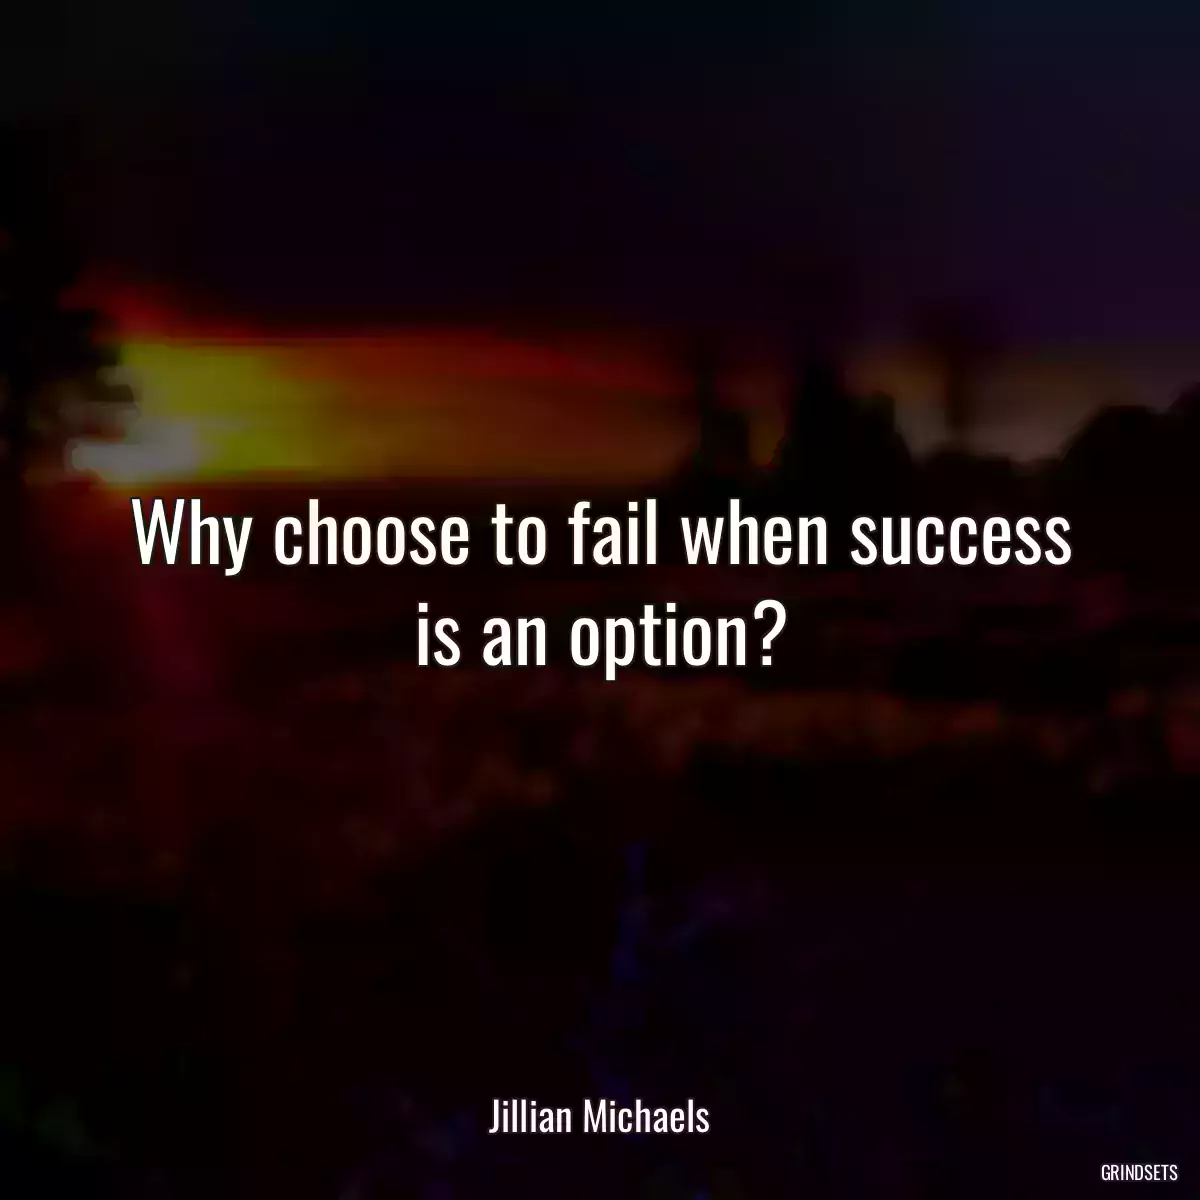 Why choose to fail when success is an option?